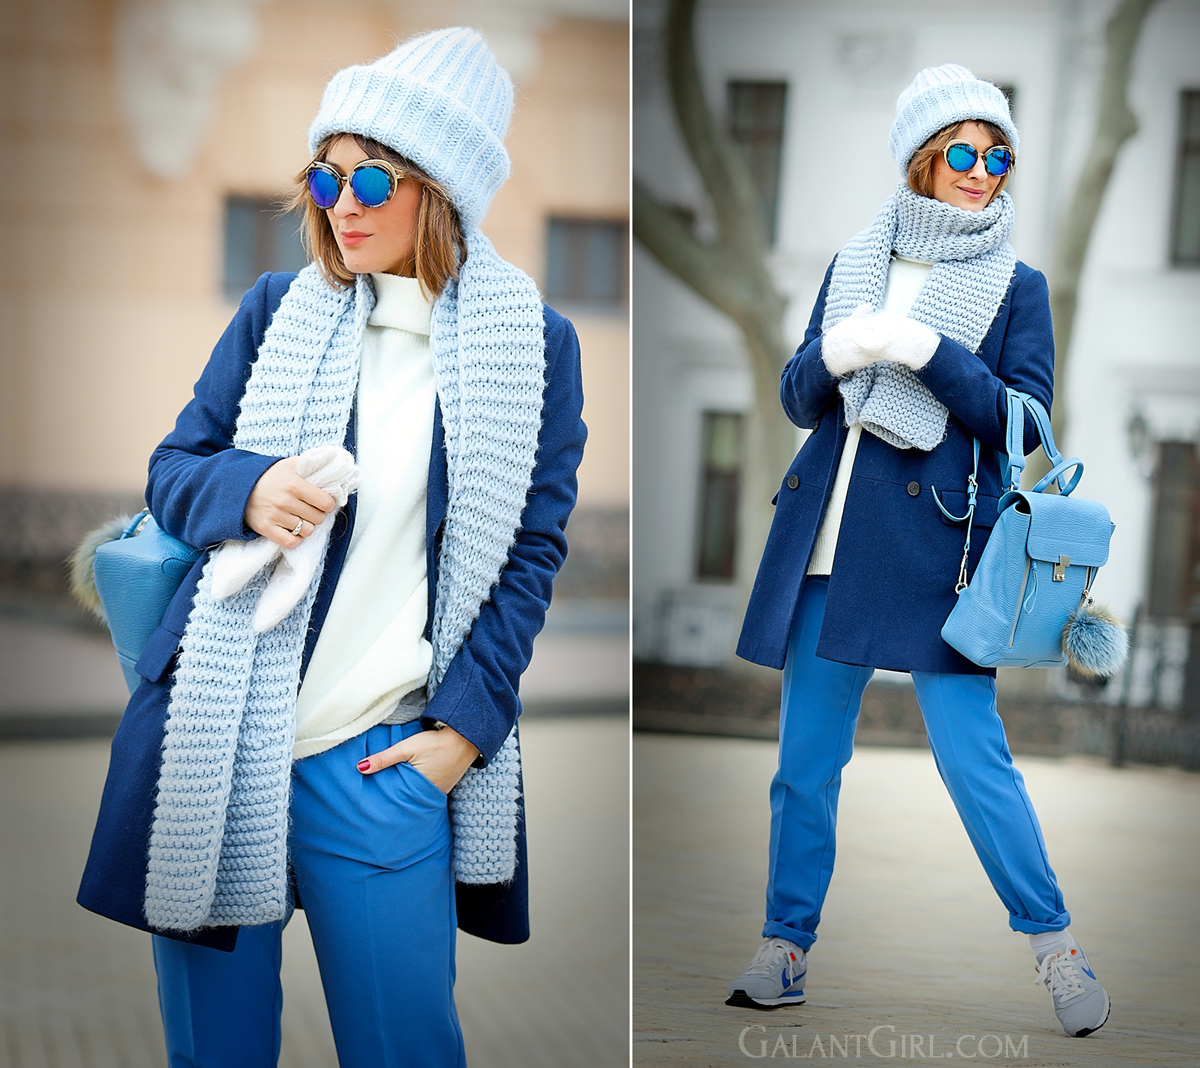 winter outfit, navy coat outfit, galant girl, cutler and gross eyewear, cutler and gross sunglasses, 